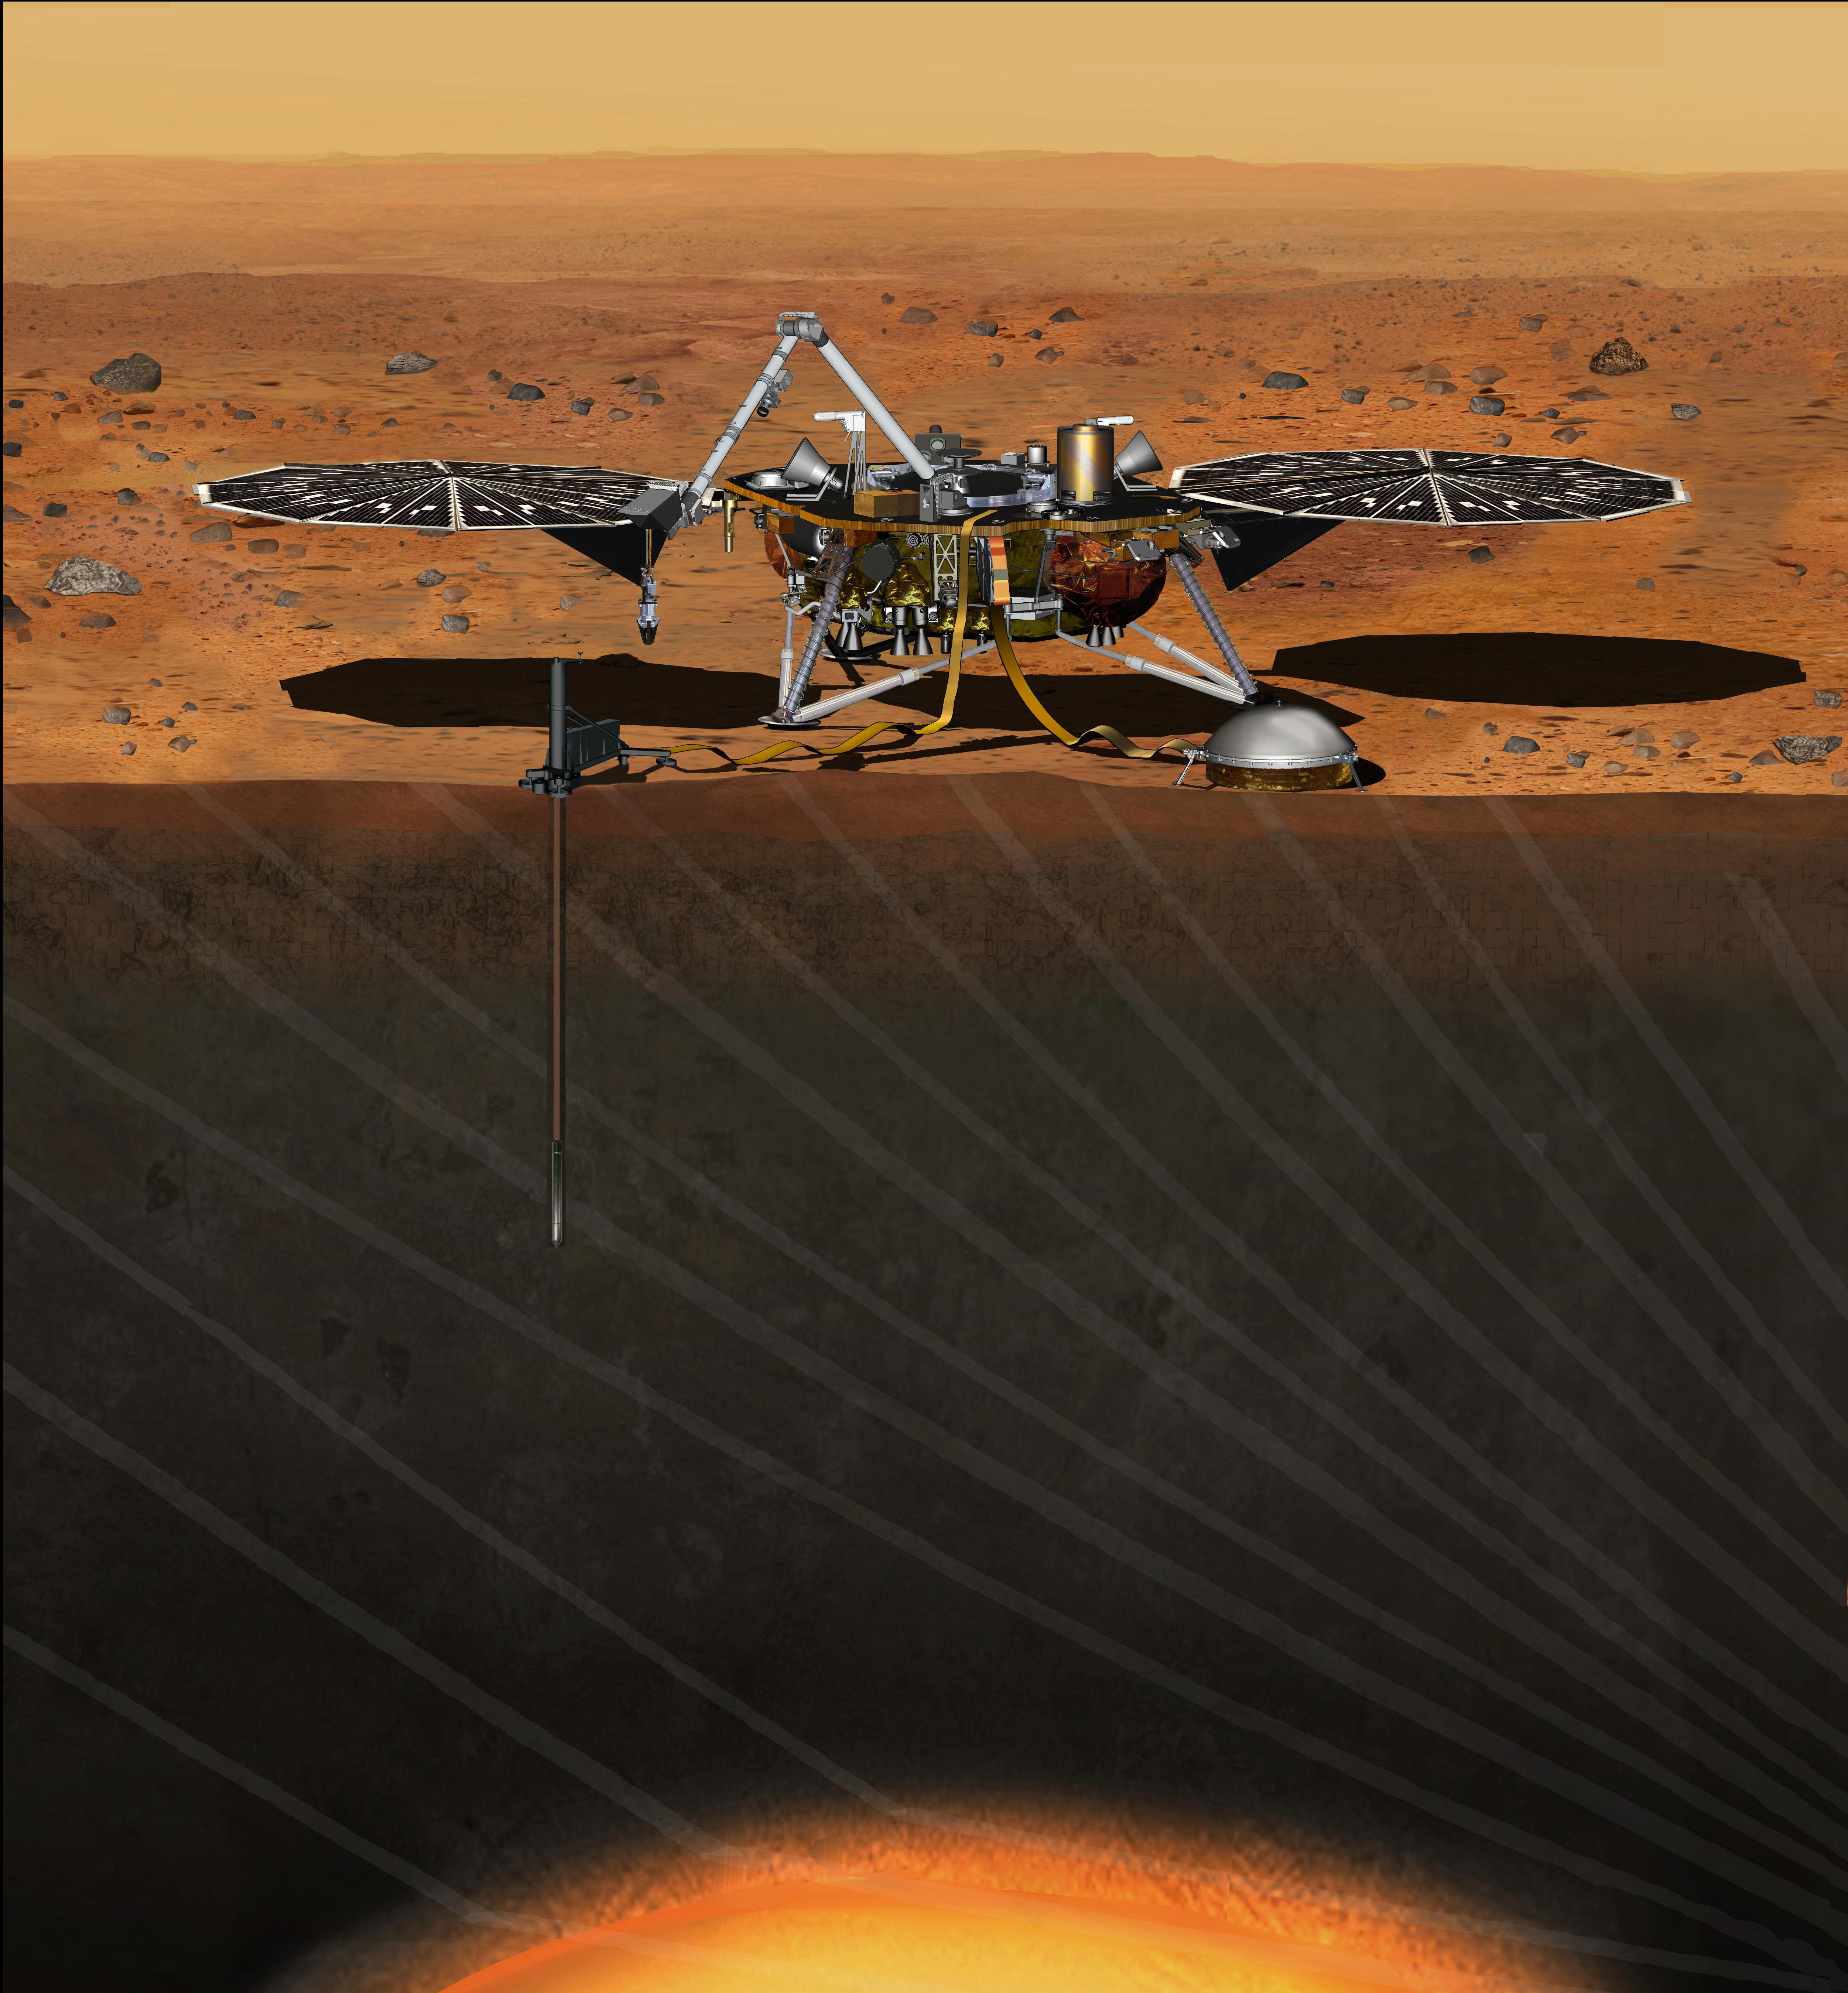 From NASA: "This artist's concept depicts the stationary NASA Mars lander known by the acronym InSight at work studying the interior of Mars." The lander will be powered by ATK's UltraFlex solar arrays. Image Credit: NASA/JPL-Caltech